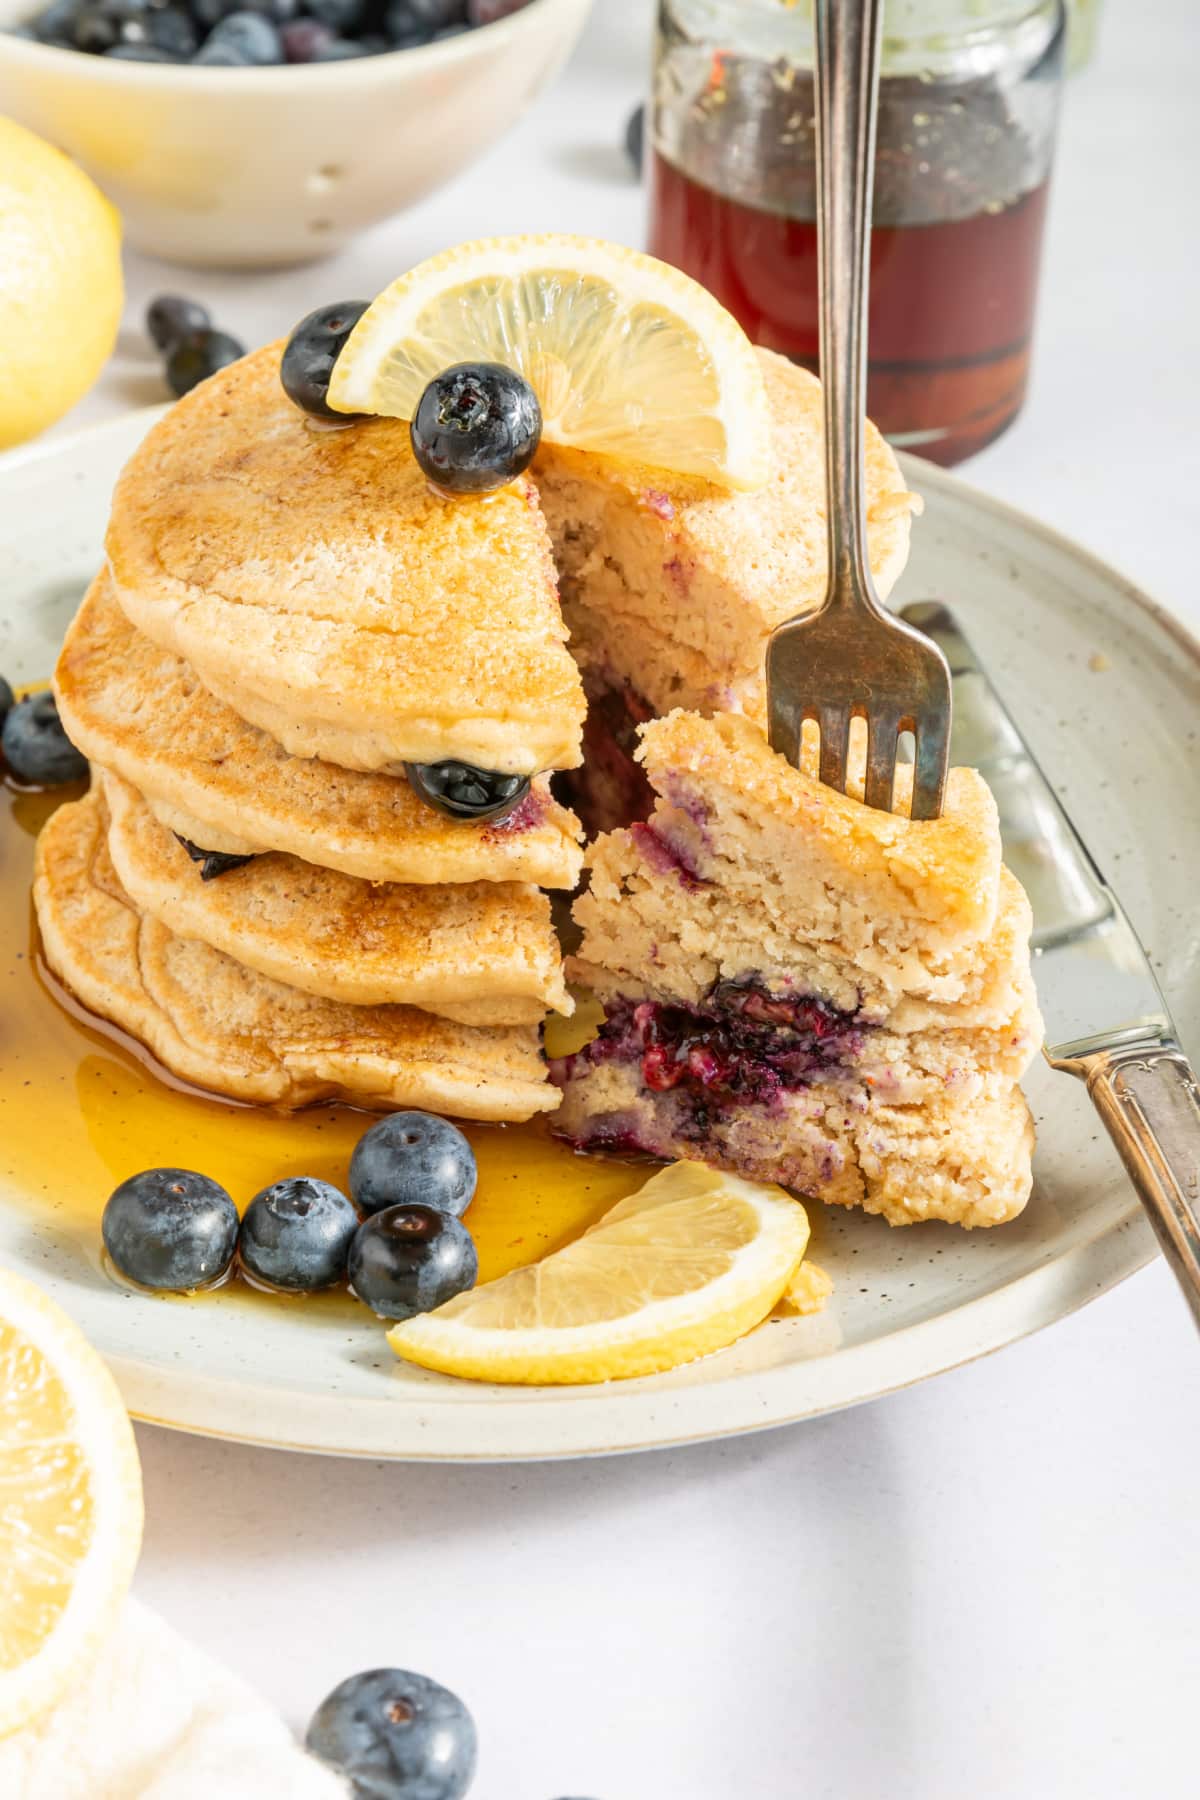 A stack of pancakes on a rustic white plate, garnished with fresh blueberries, lemon slices, and syrup. A knife sits on the plate, and there is one triangle bite cut out of the pancake stack, still on the plate with a fork in it.